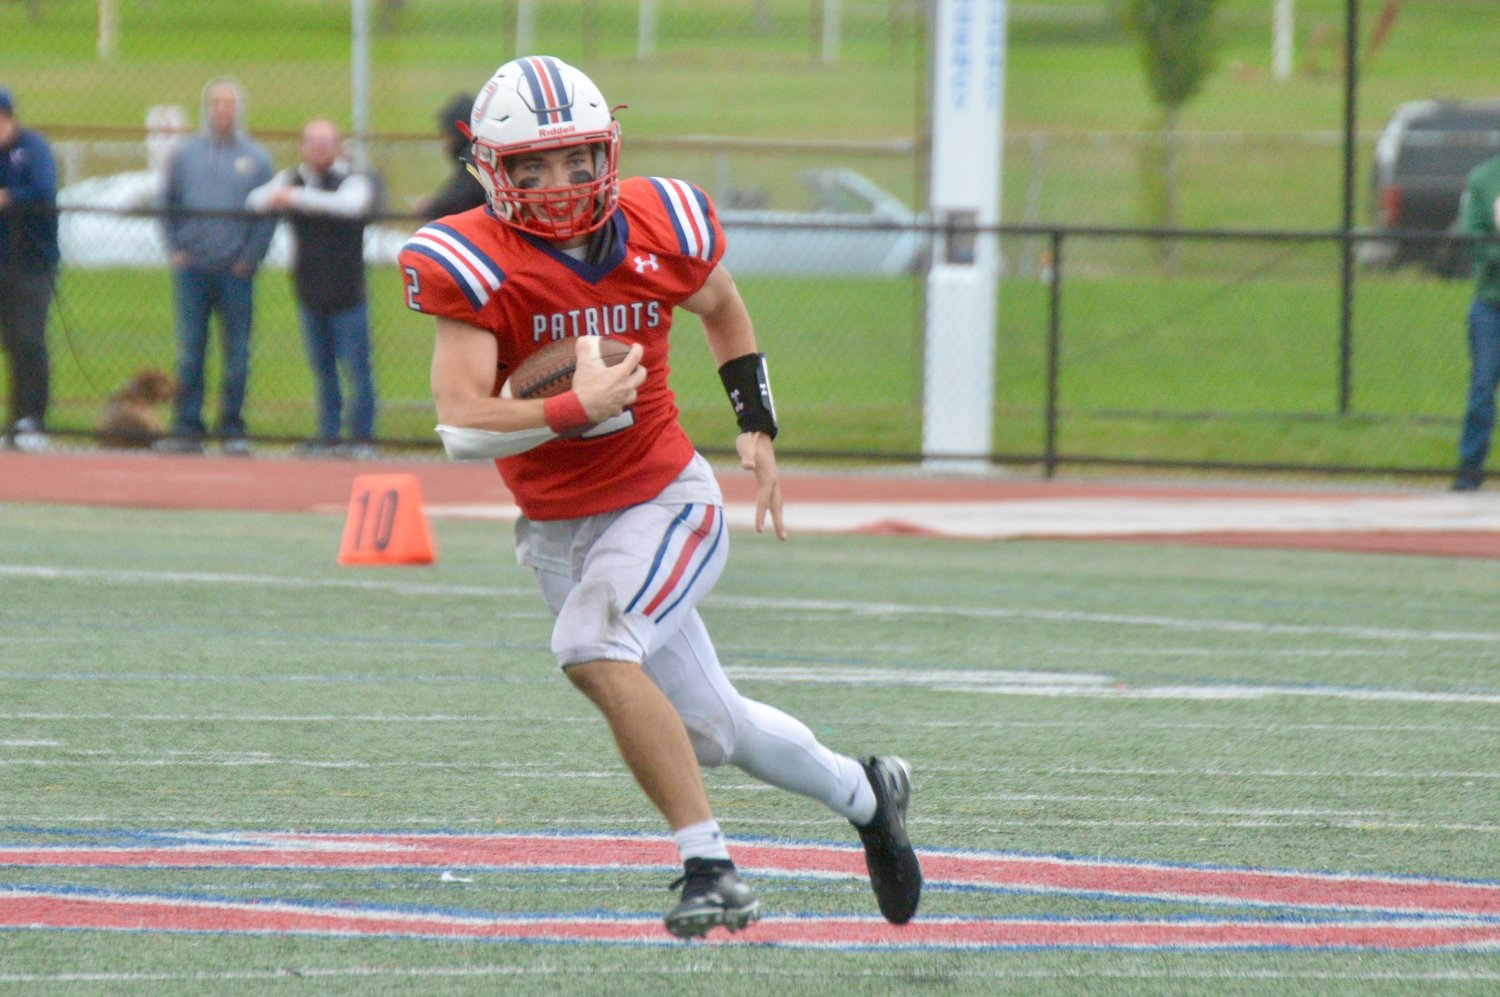 Quarterback Ben Hurd keeps the ball for a gain in the first half.